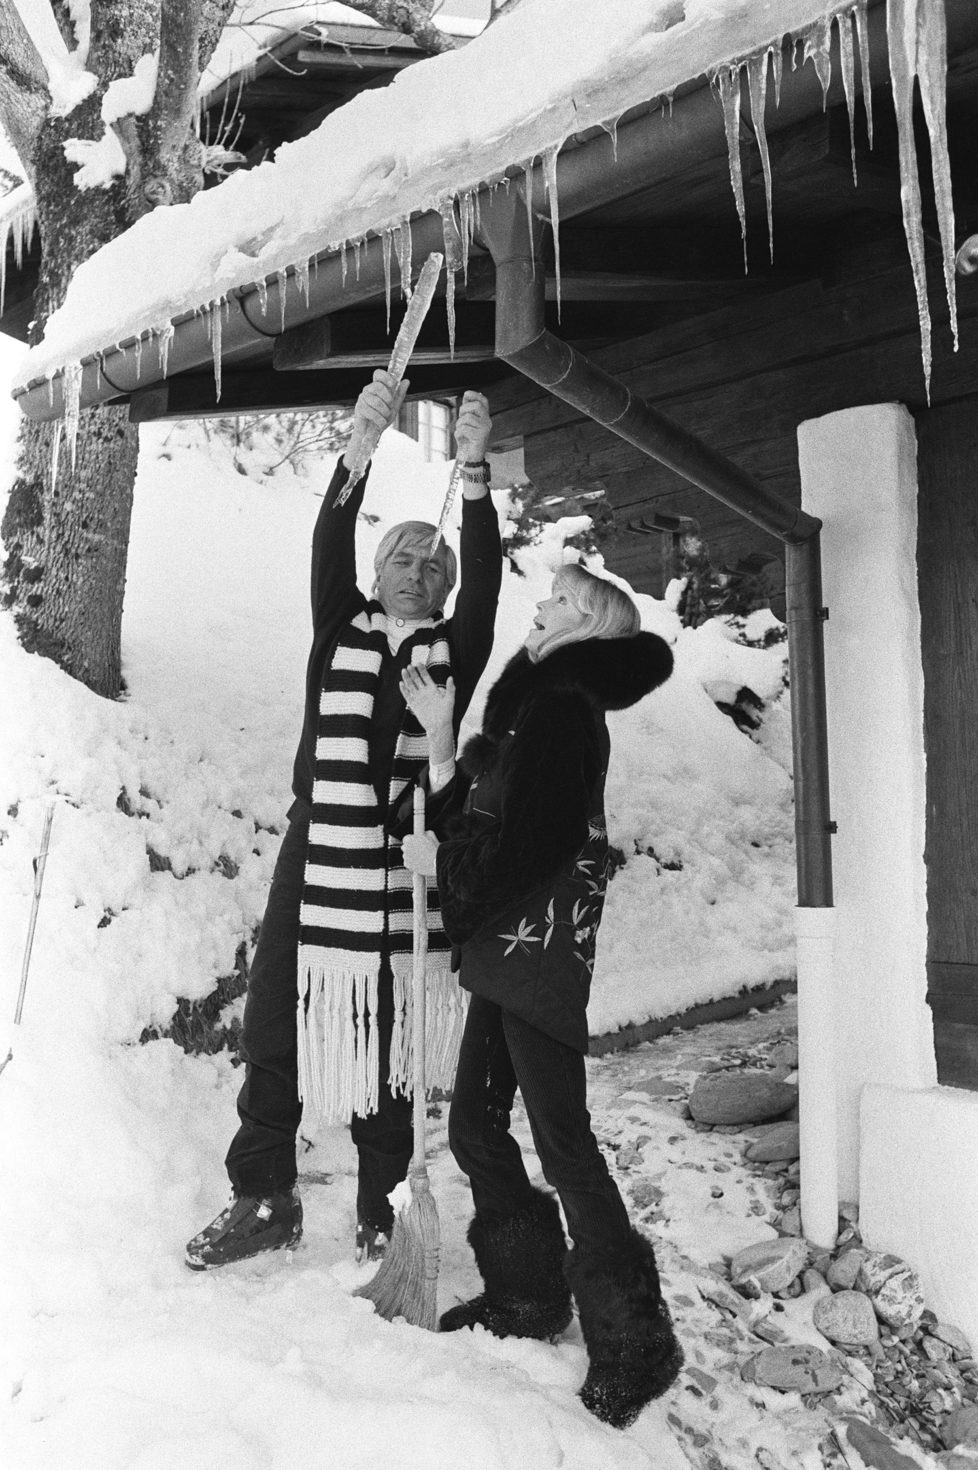 Gstaad,SWITZERLAND - DECEMBER 28: Gunther Sachs and his wife Mirja on winter holidays in Gstaad in 1979(Photo by Bertrand LAFORET/Gamma-Rapho via Getty Images)